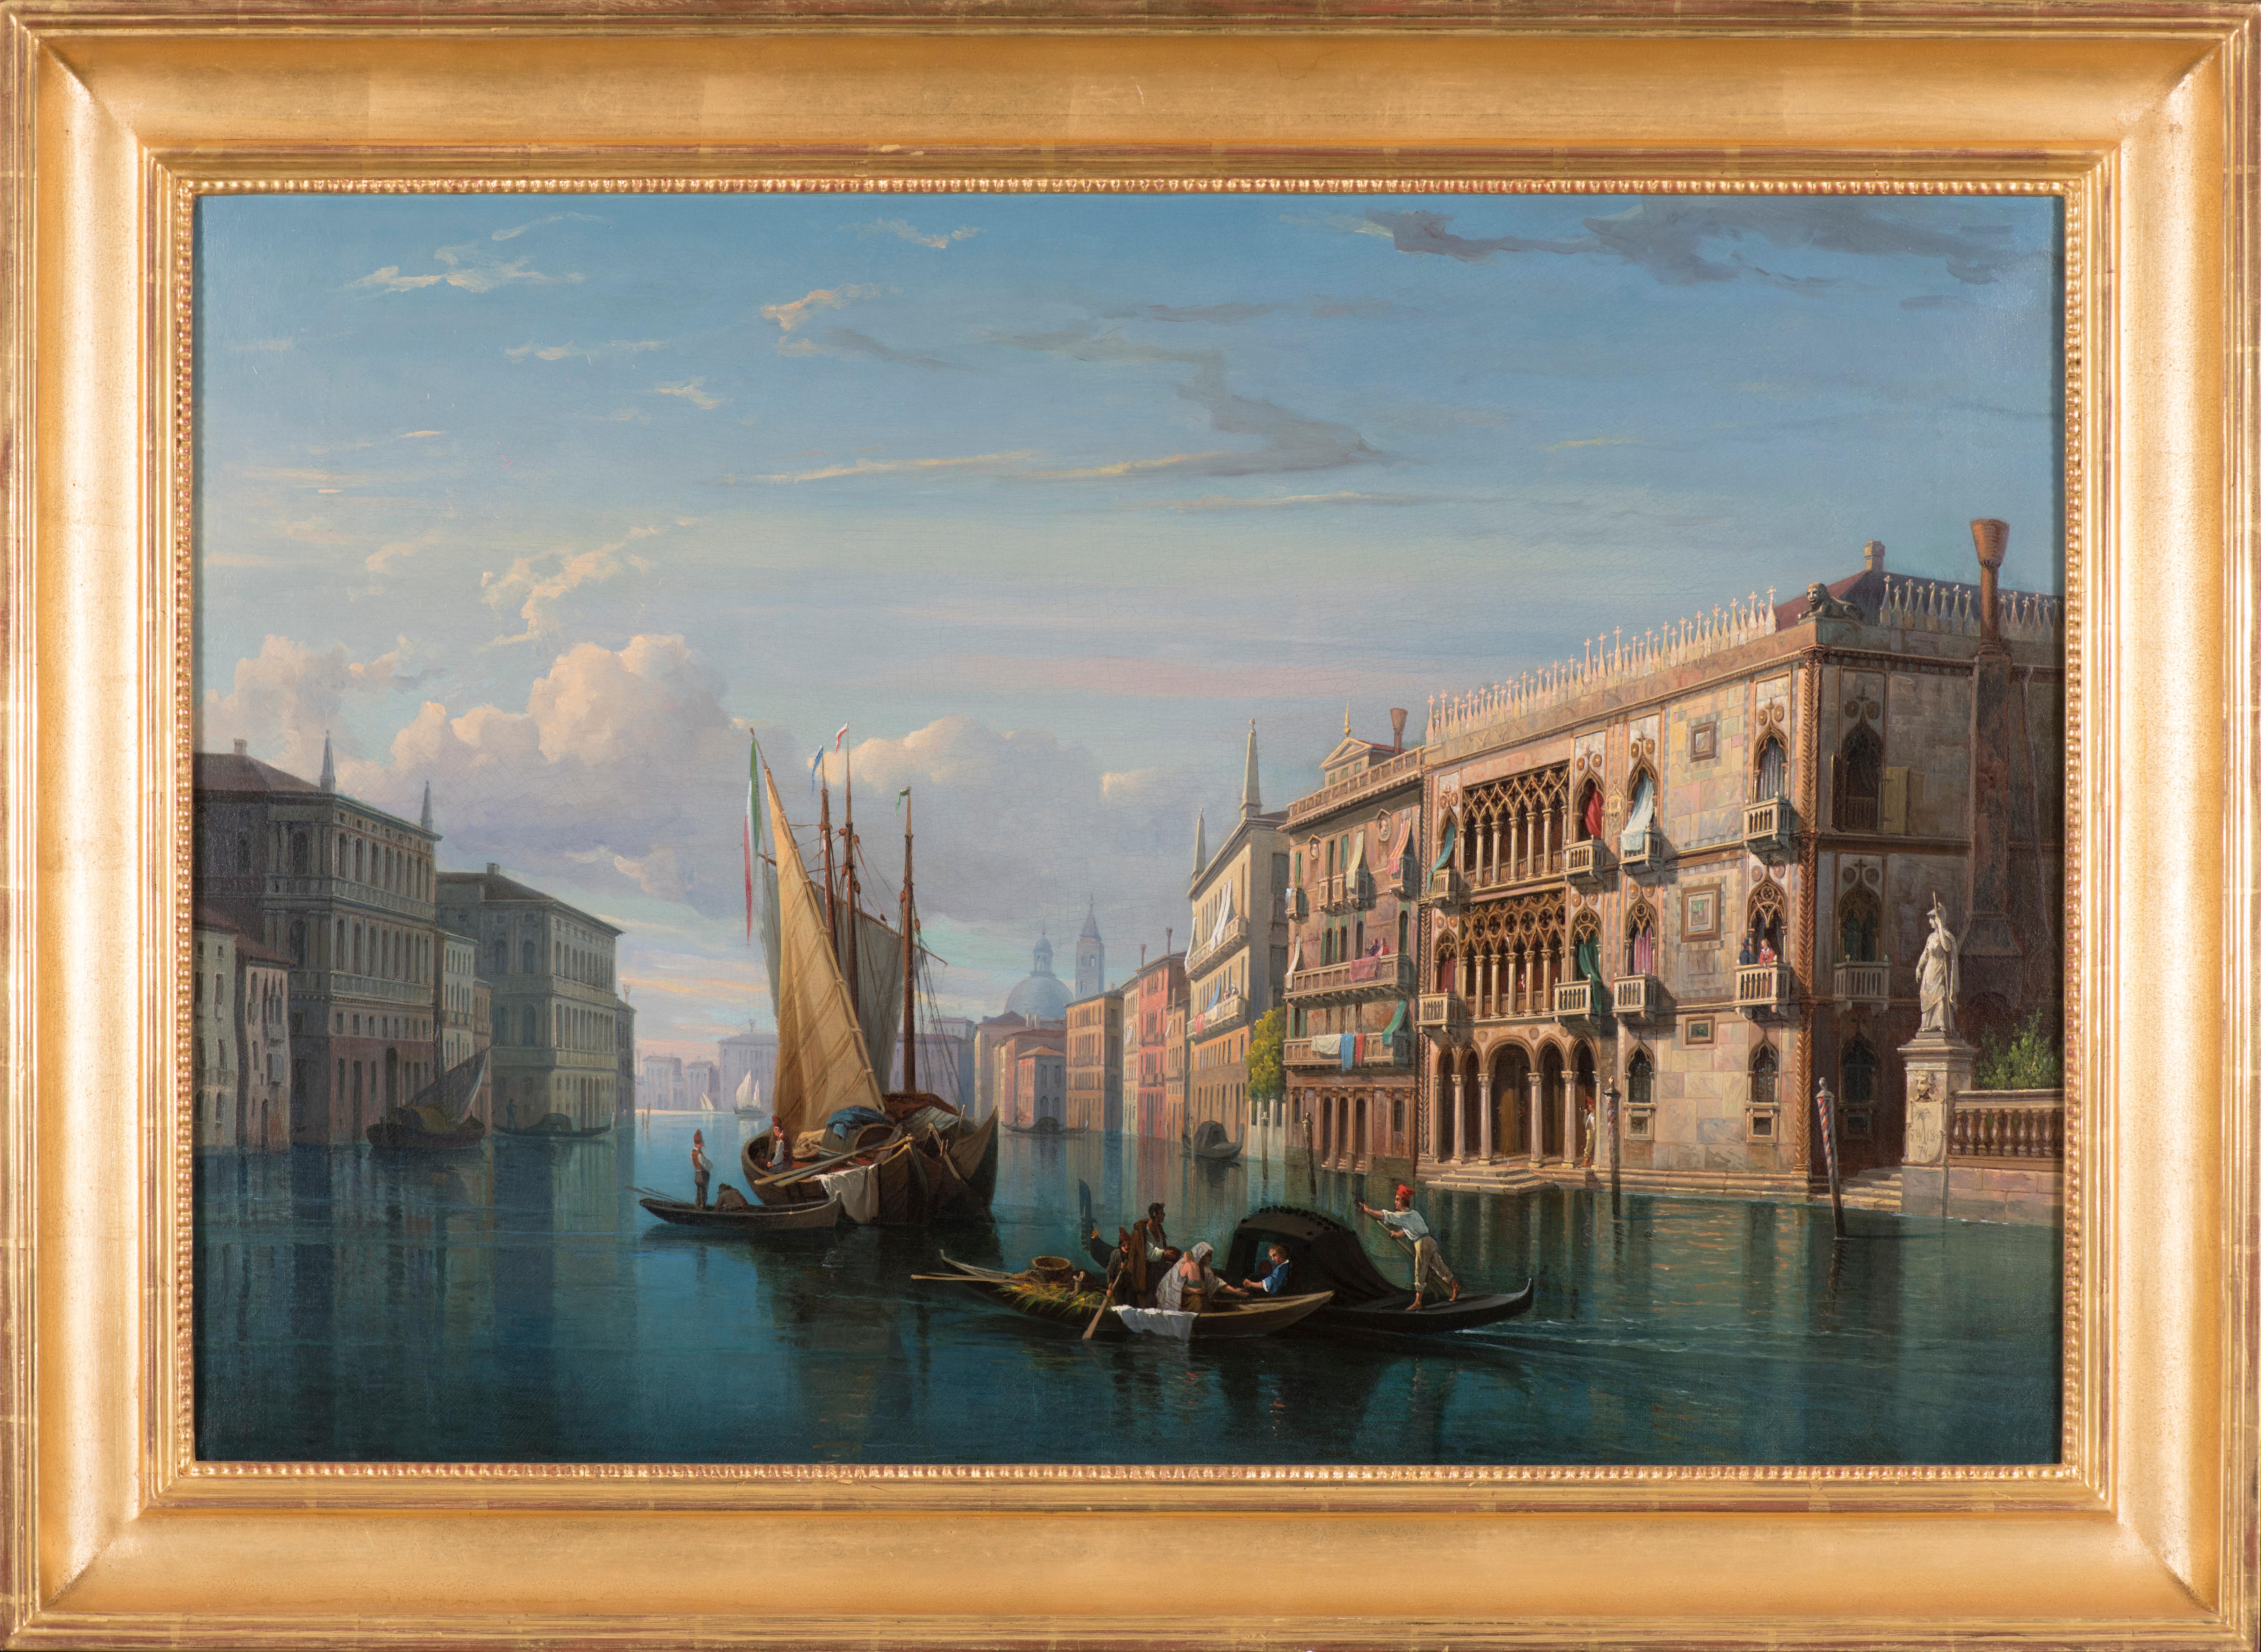 View of the Palazzo Cá d’Oro in Venice - Painting by Gustav Vilhelm Palm